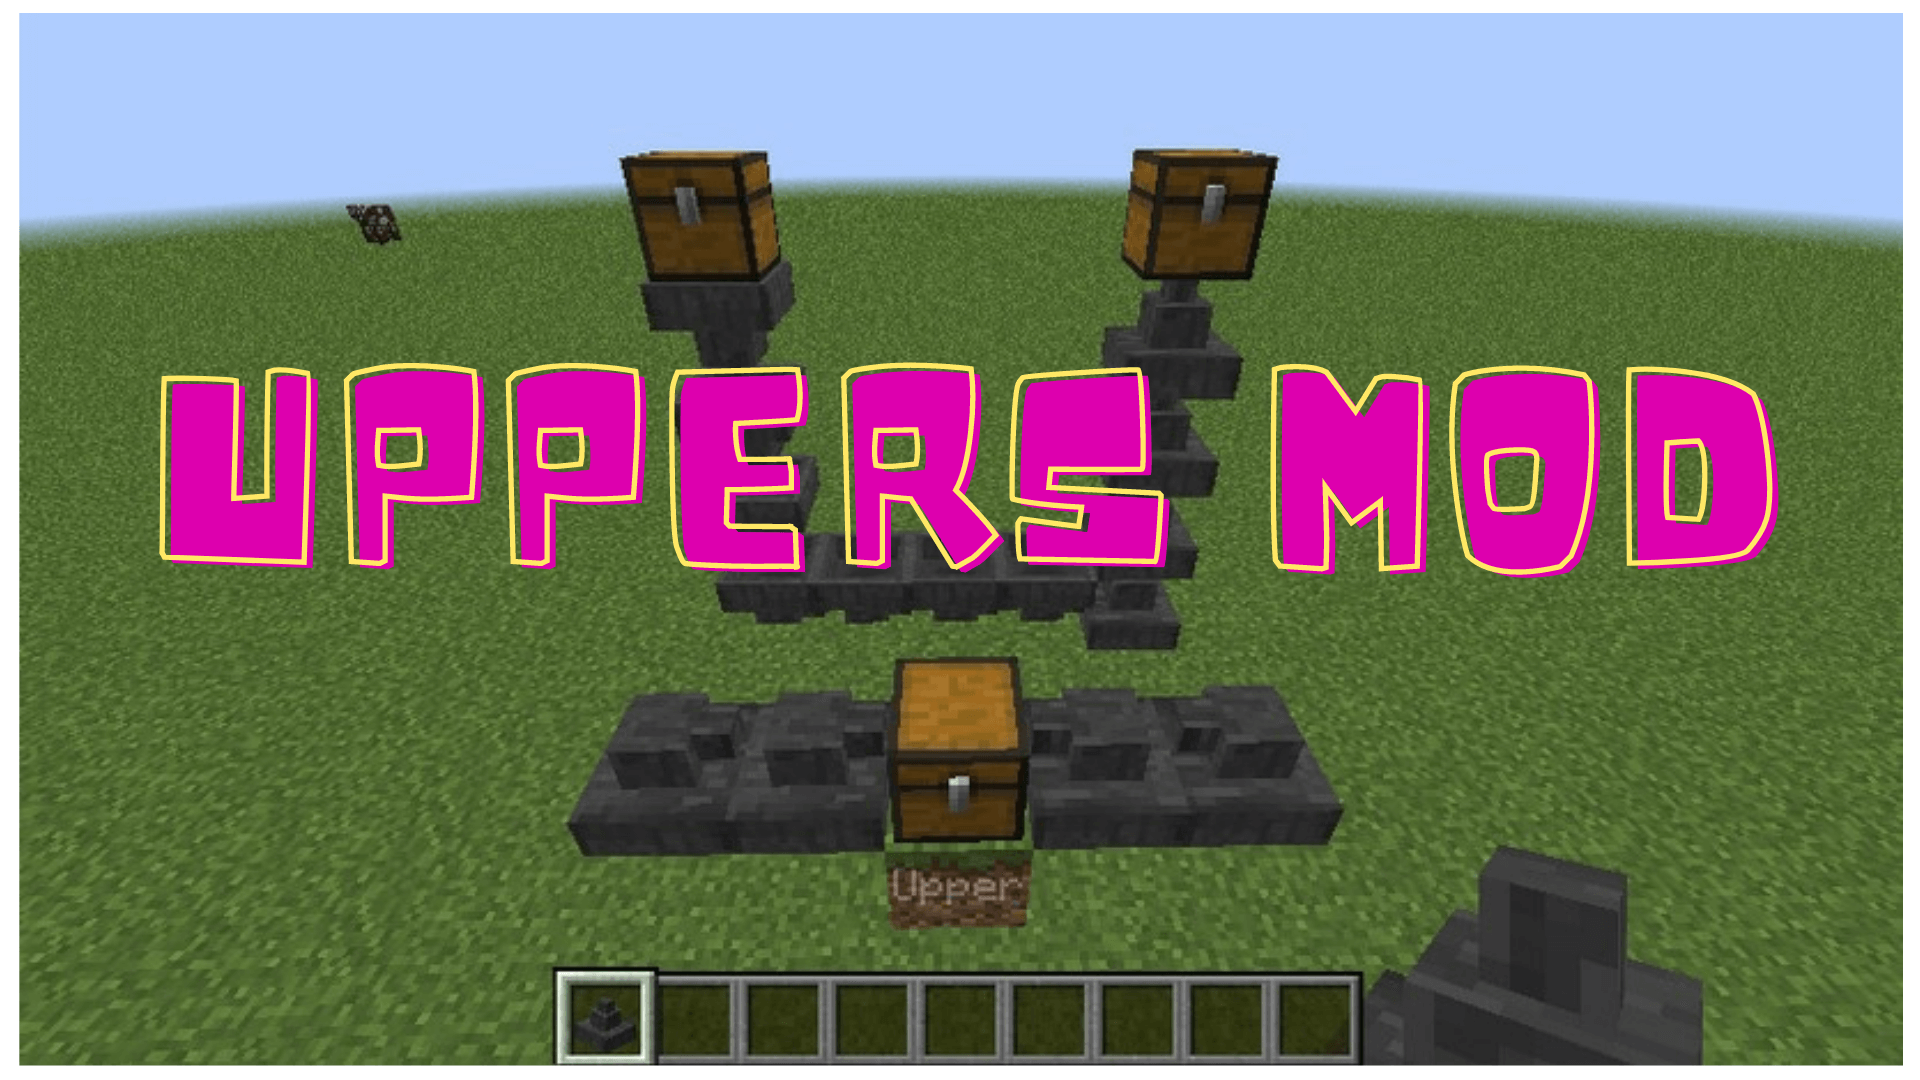 Uppers Mod